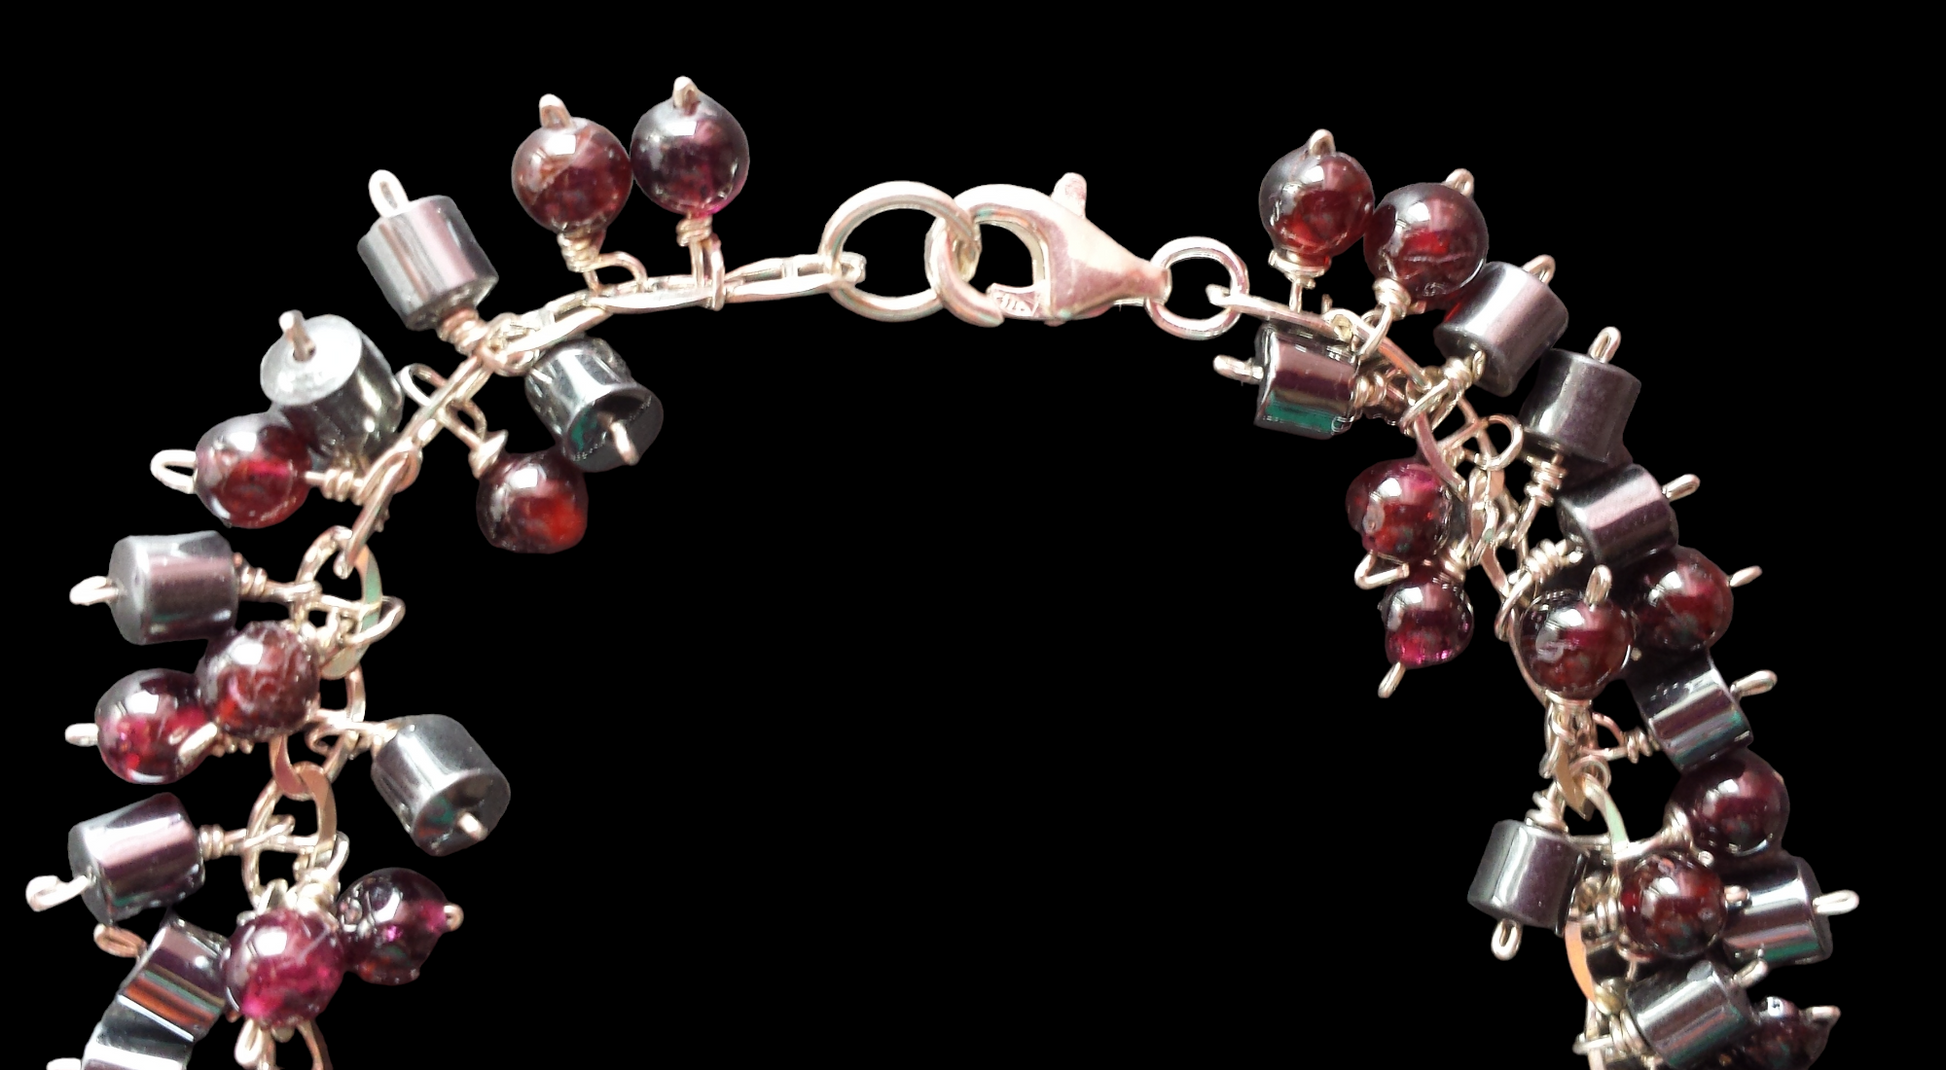 Eco Garnet Hematite Sumac Tree Cluster Bracelet, Upcycled Hematite and Deep Red Pink Garnets on Upcycled Sterling Silver